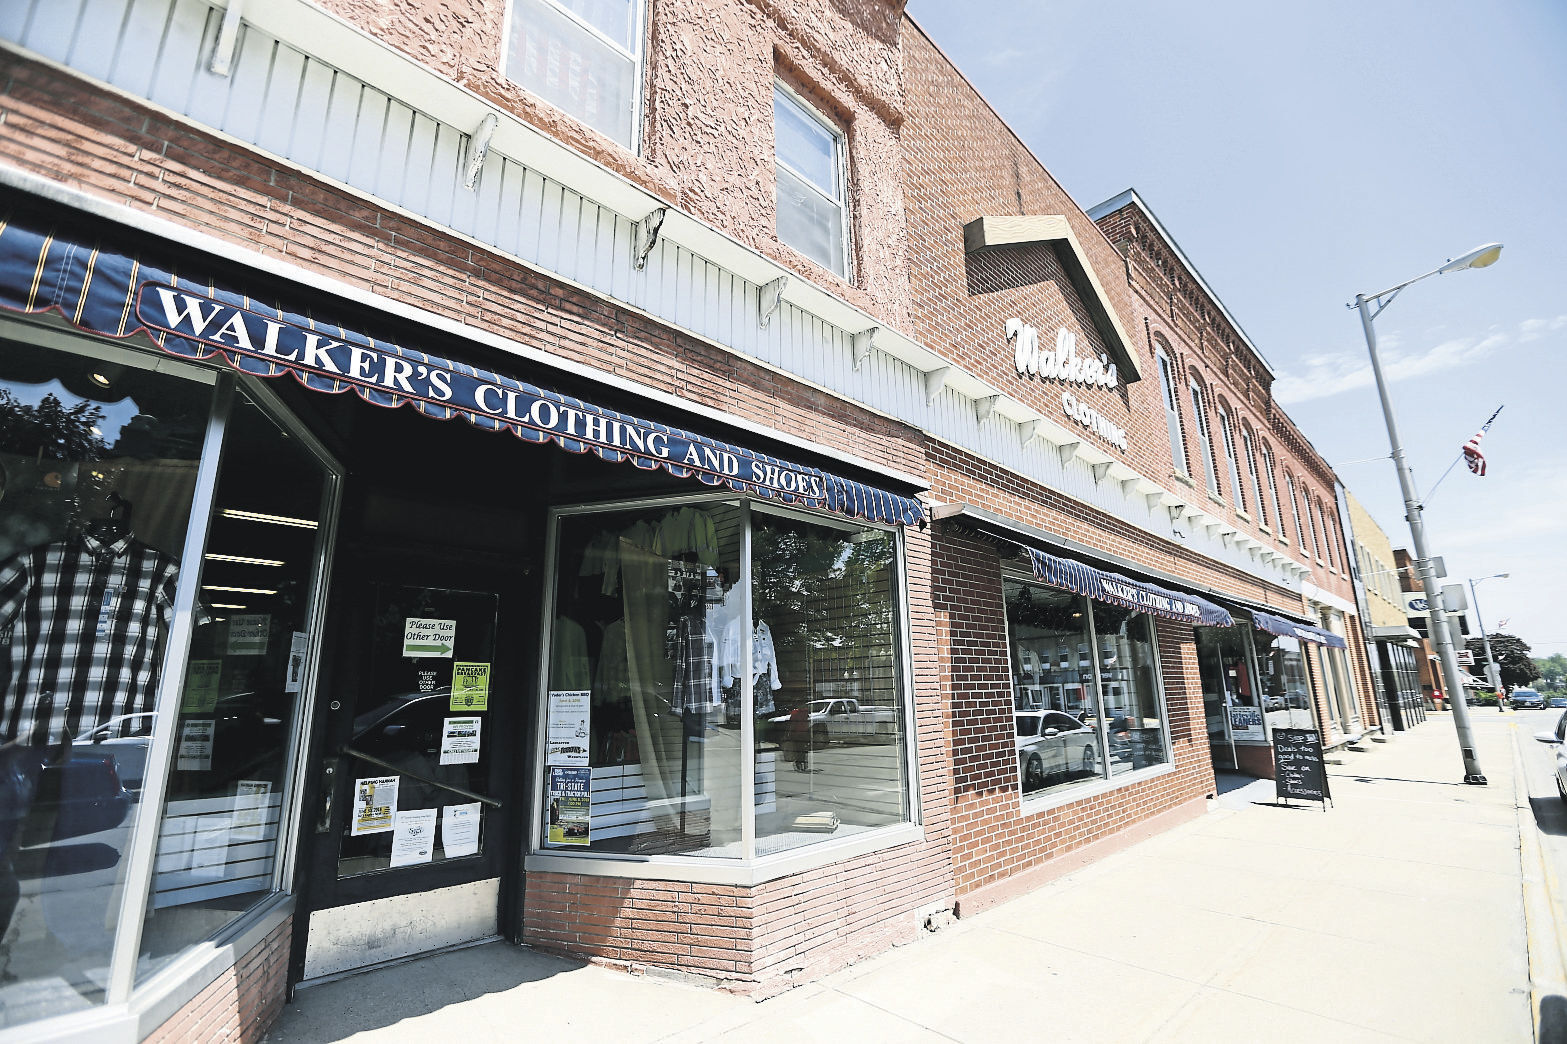 After more than nine decades in the family, Walker’s Clothing and Shoes in Lancaster, Wis. is being sold to former employee Karri Schauff and her husband, David. PHOTO CREDIT: Dave Kettering